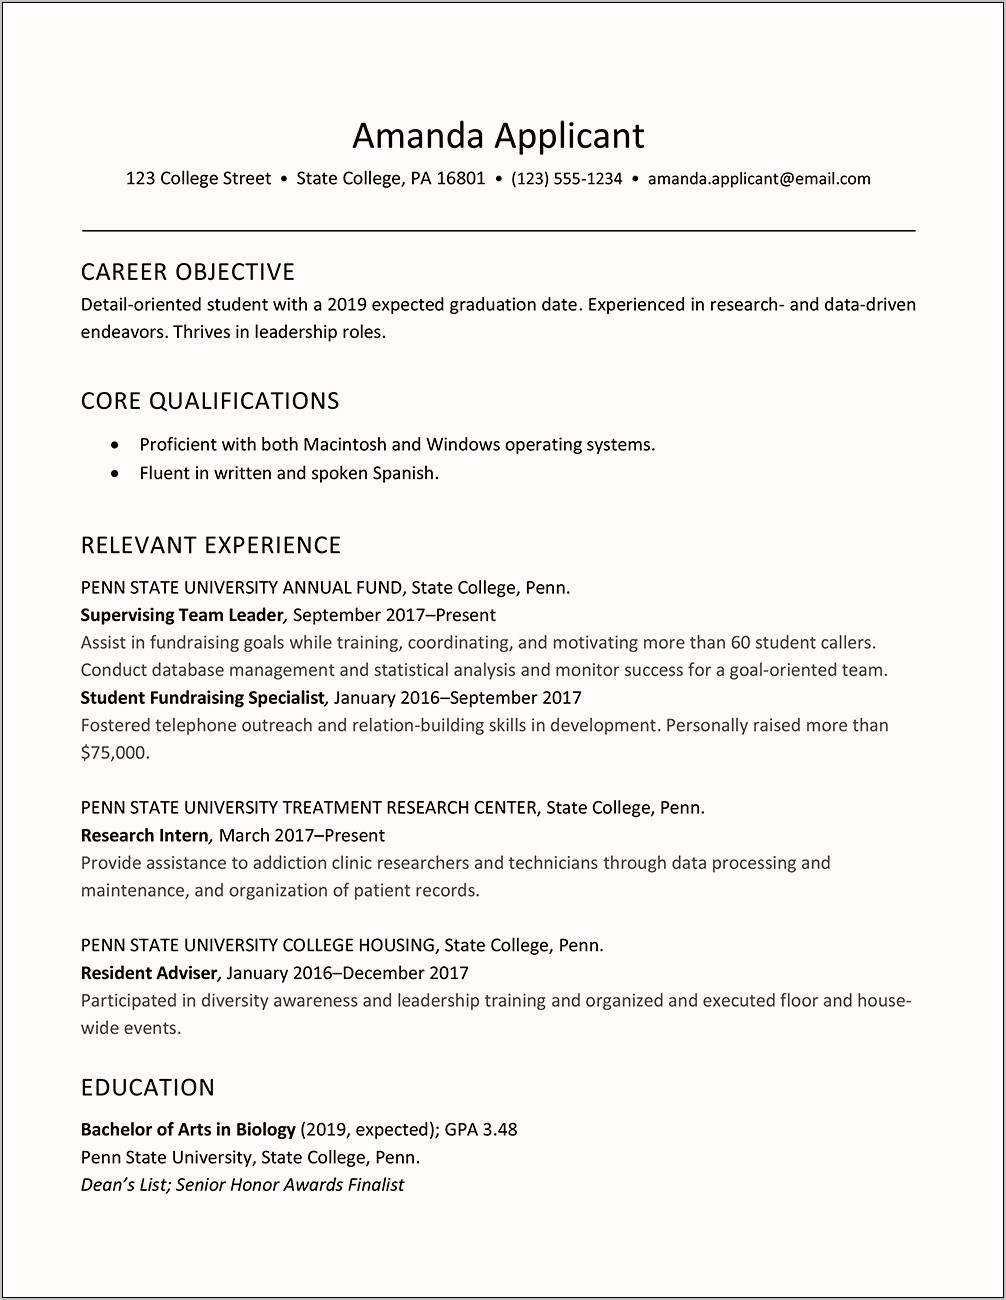 Examples Of Leaders Summary For Resume